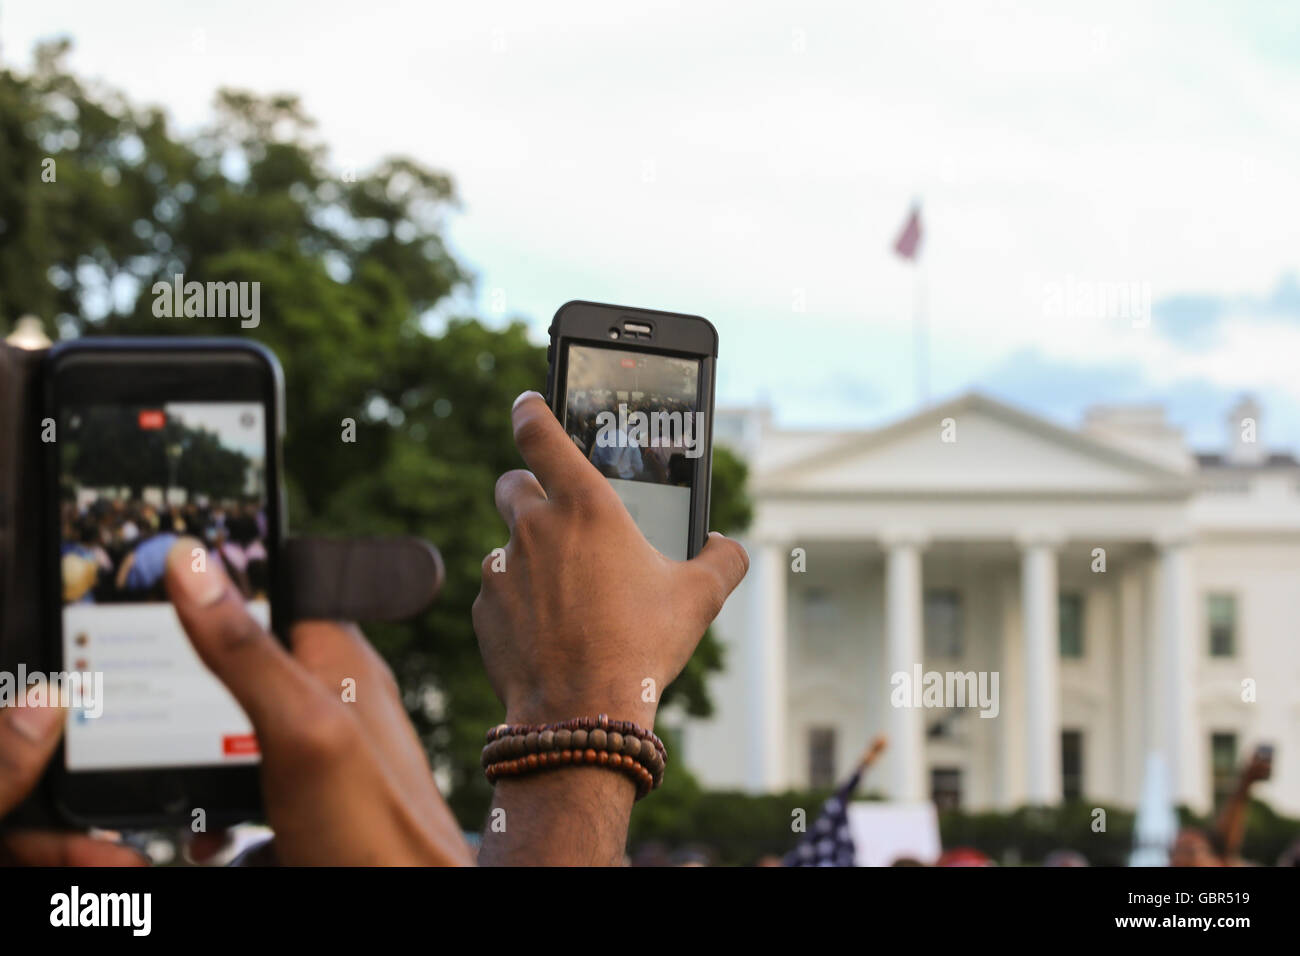 Protesters gather in front of the White House after recent police involved shootings of Alton Sterling and Philando Castile. Smartphones are held in the air providing live video to social media followers of the protesters. Stock Photo